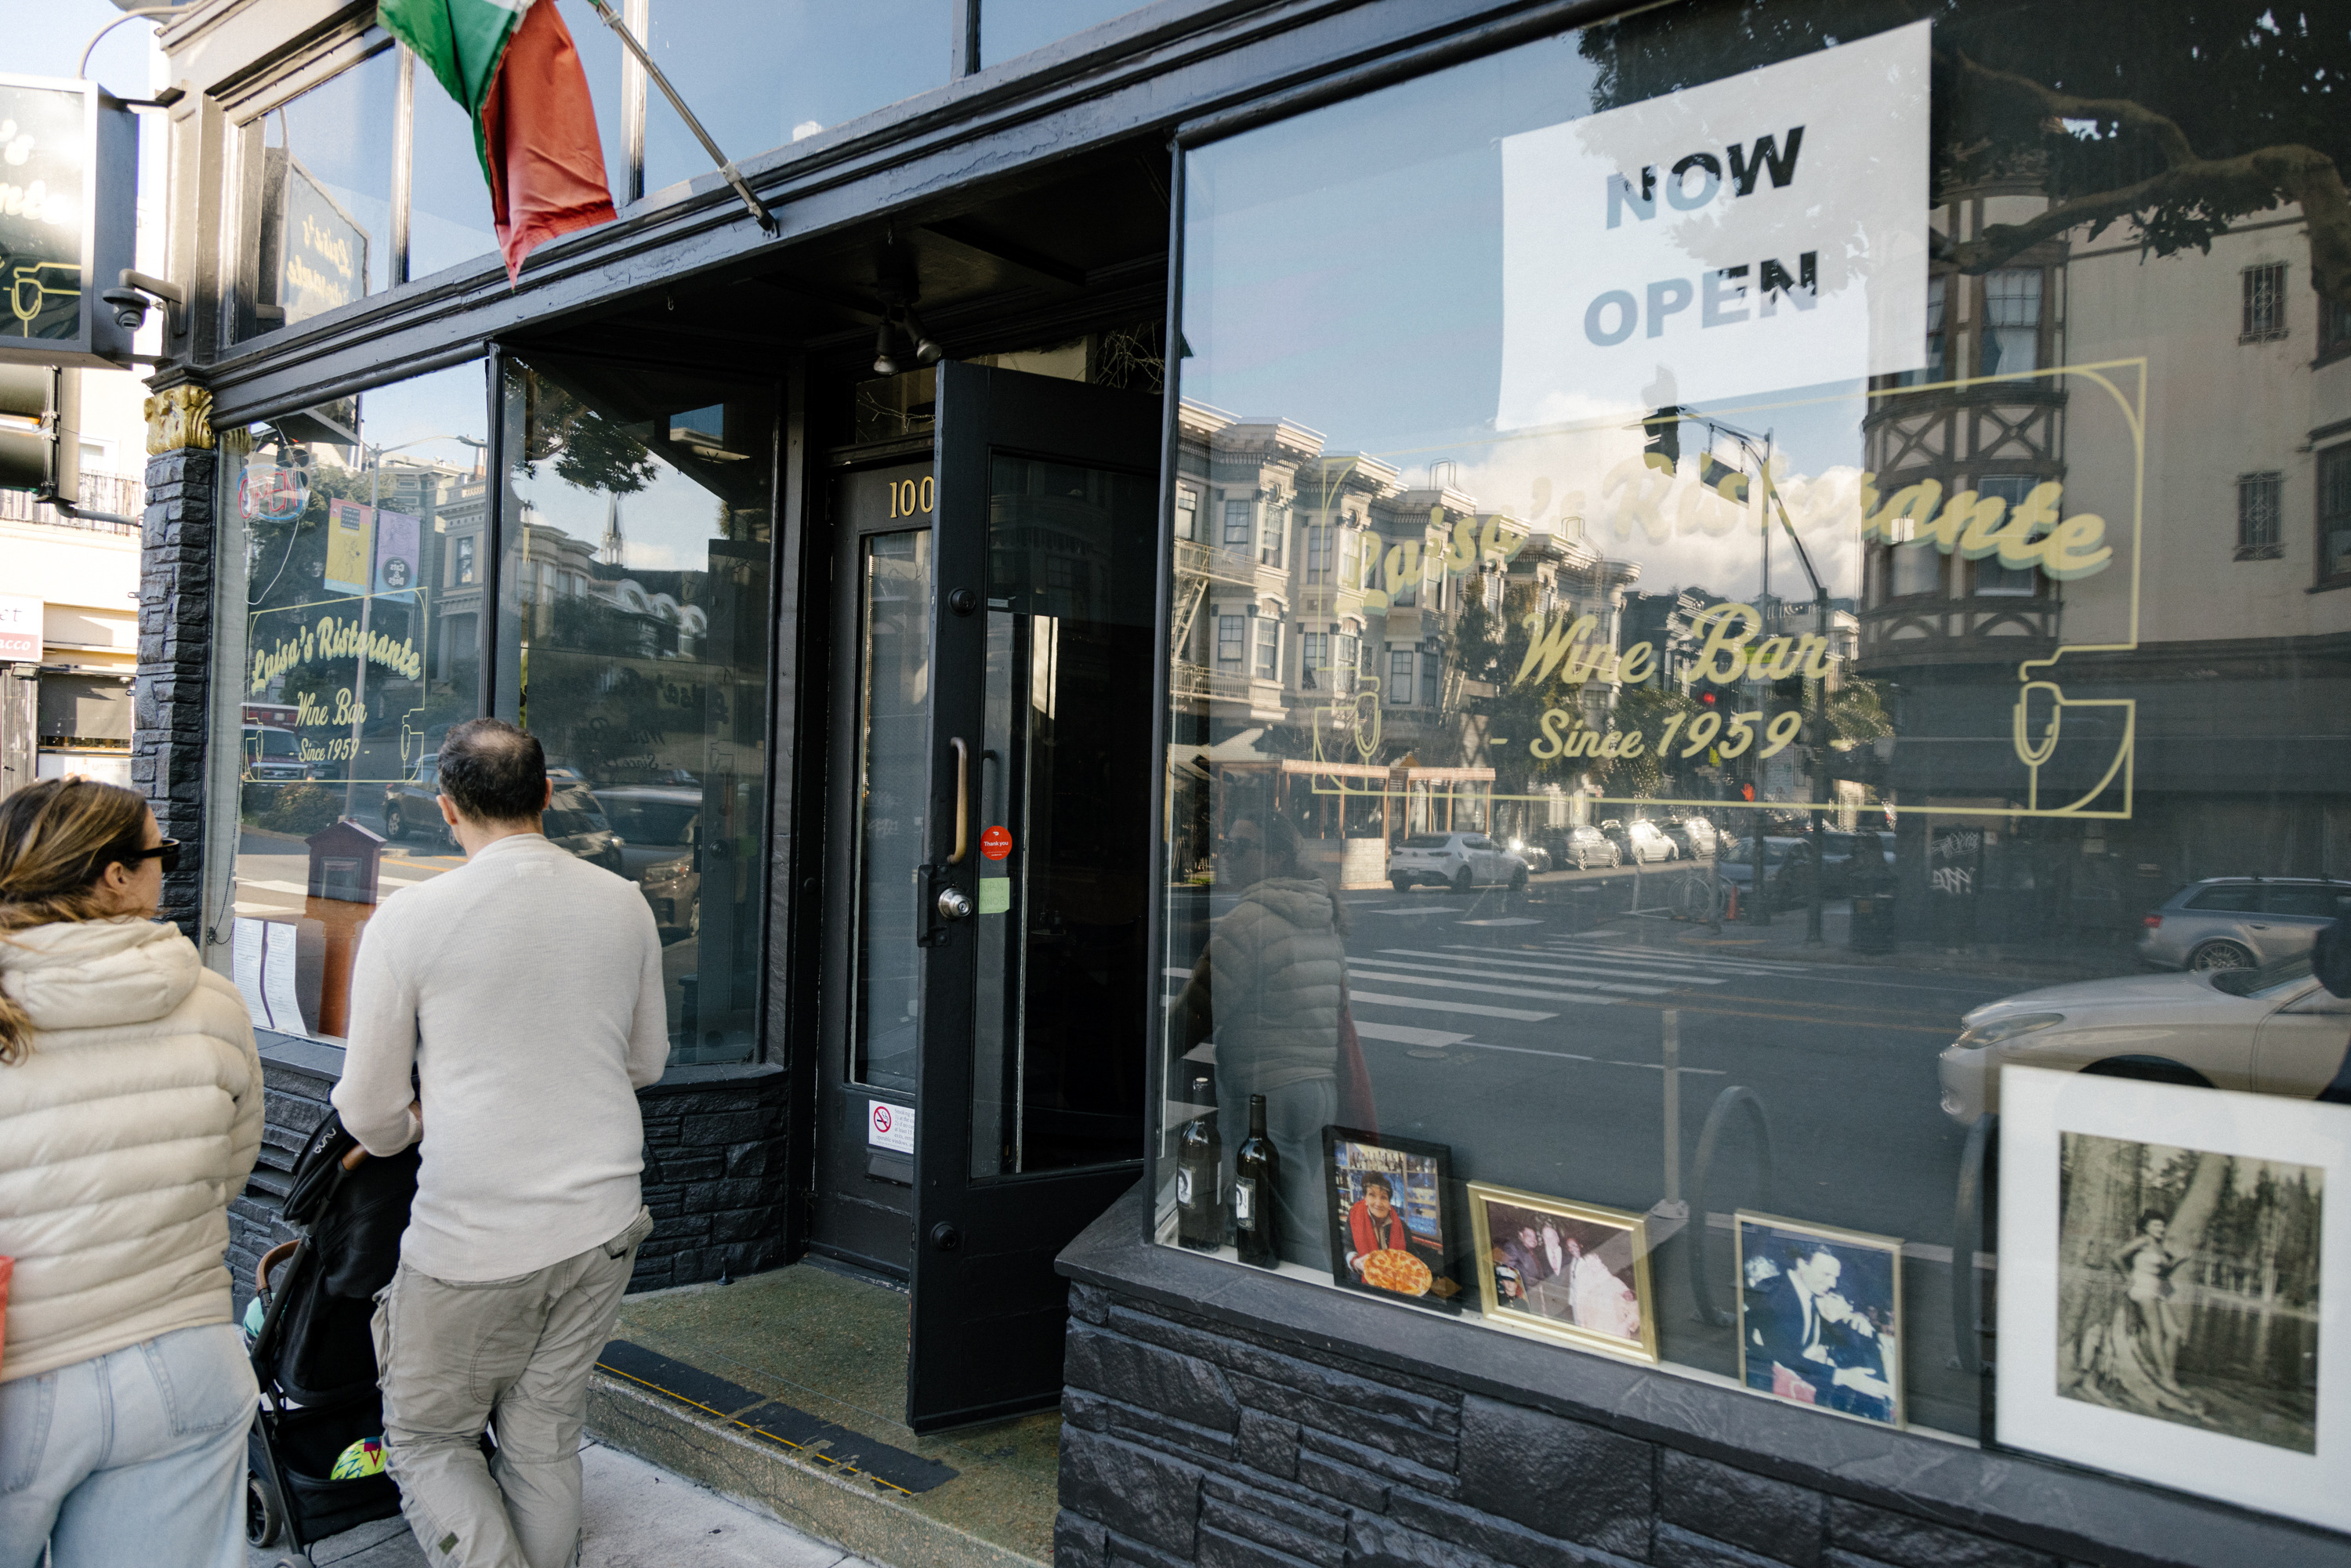 A couple with a stroller stands outside a bar with a &quot;Now Open&quot; sign, as street reflections merge with the interior.